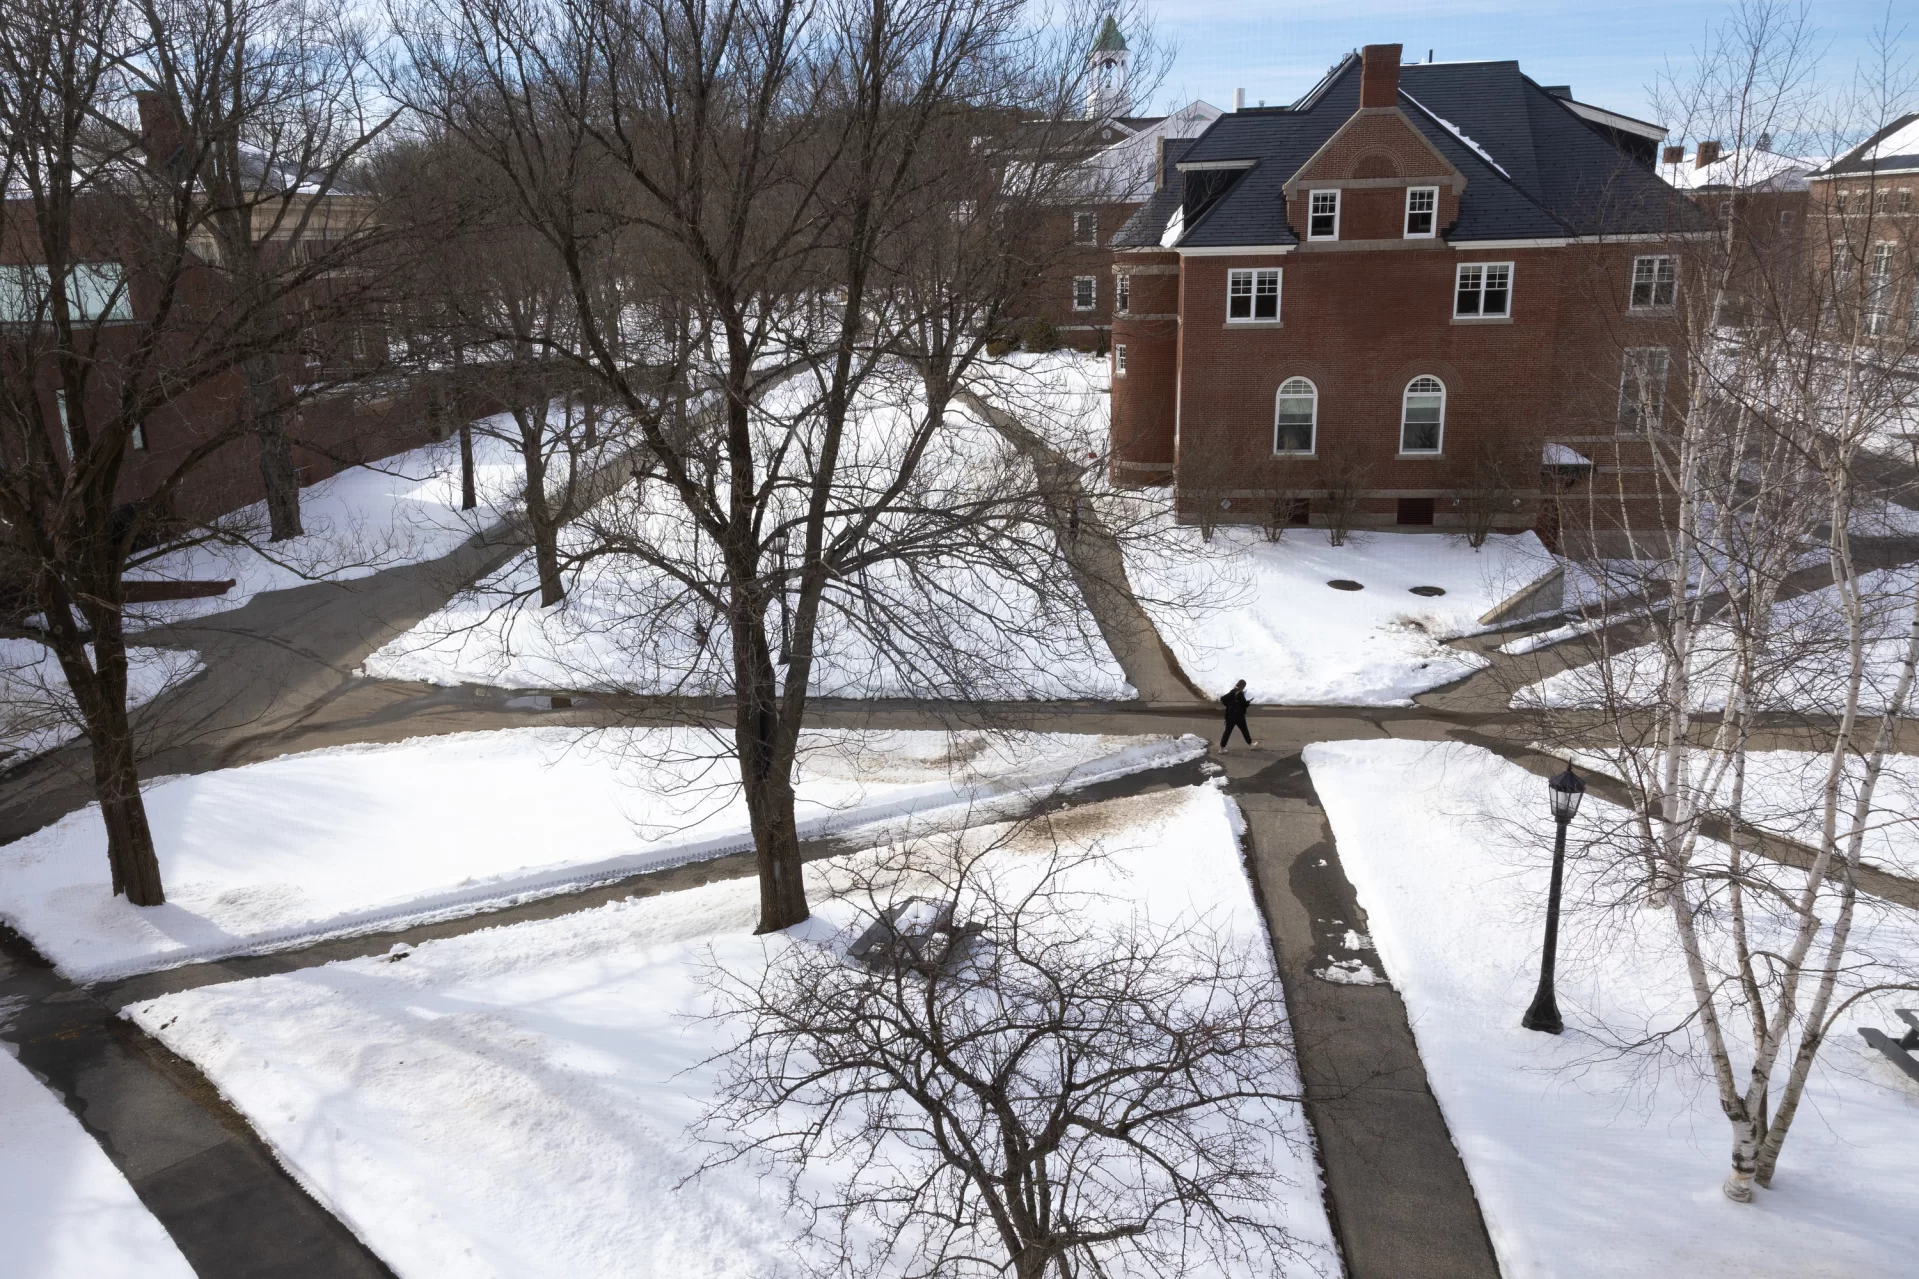 After a rainy and warm winter, Bates was surprised by a big late-seasons snowfalls, a foot on March 24.

This photograph was taken from a window in Roger Williams Hall shortly after the first snowstorm as the high spring sun starts doing a number on the new snowfall.